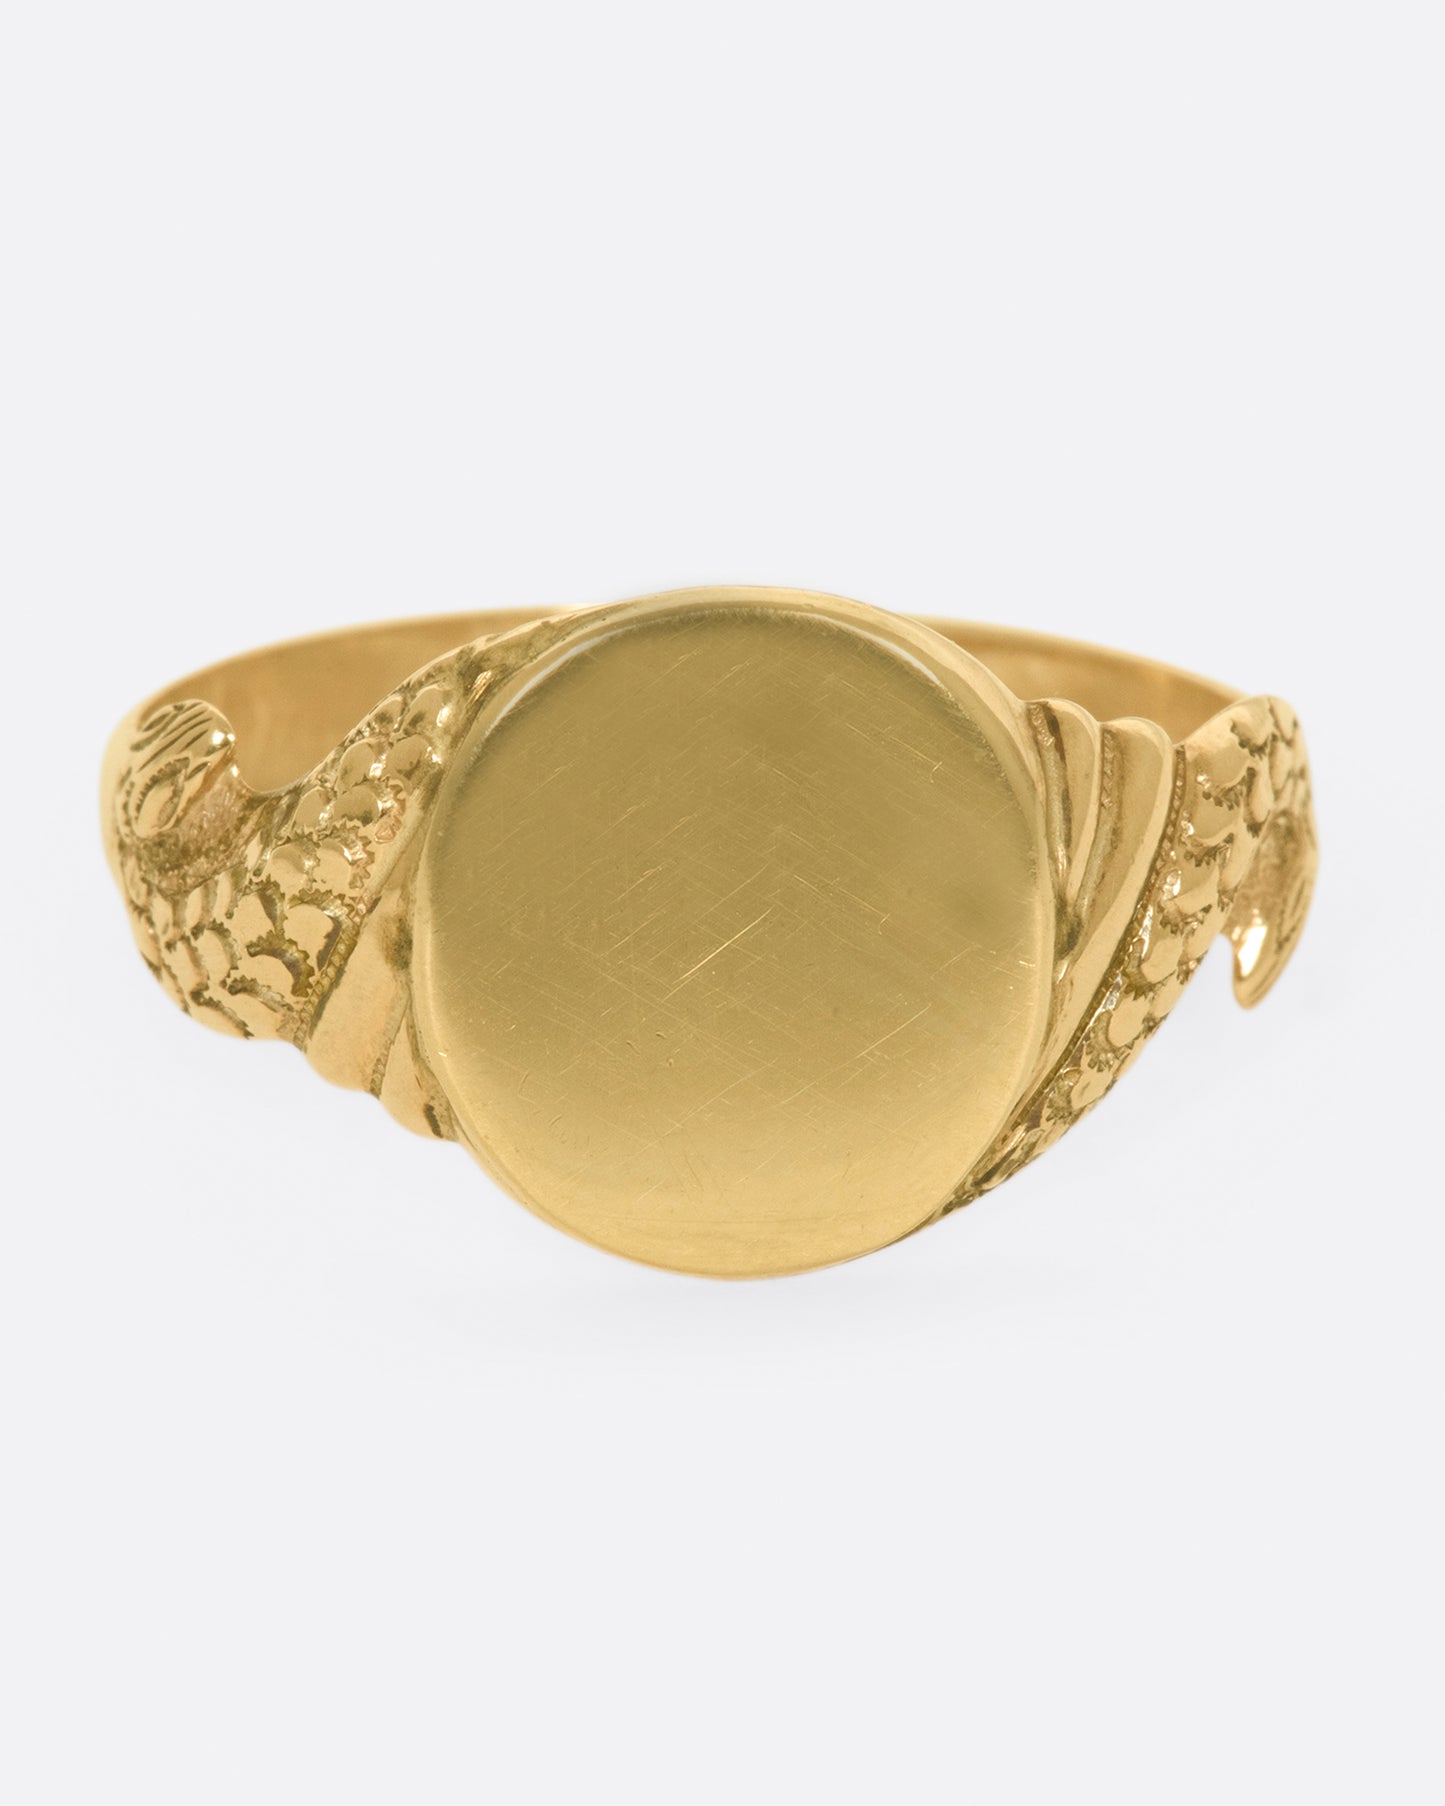 A classic, blank signet ring with carved snakes swirling around the band.